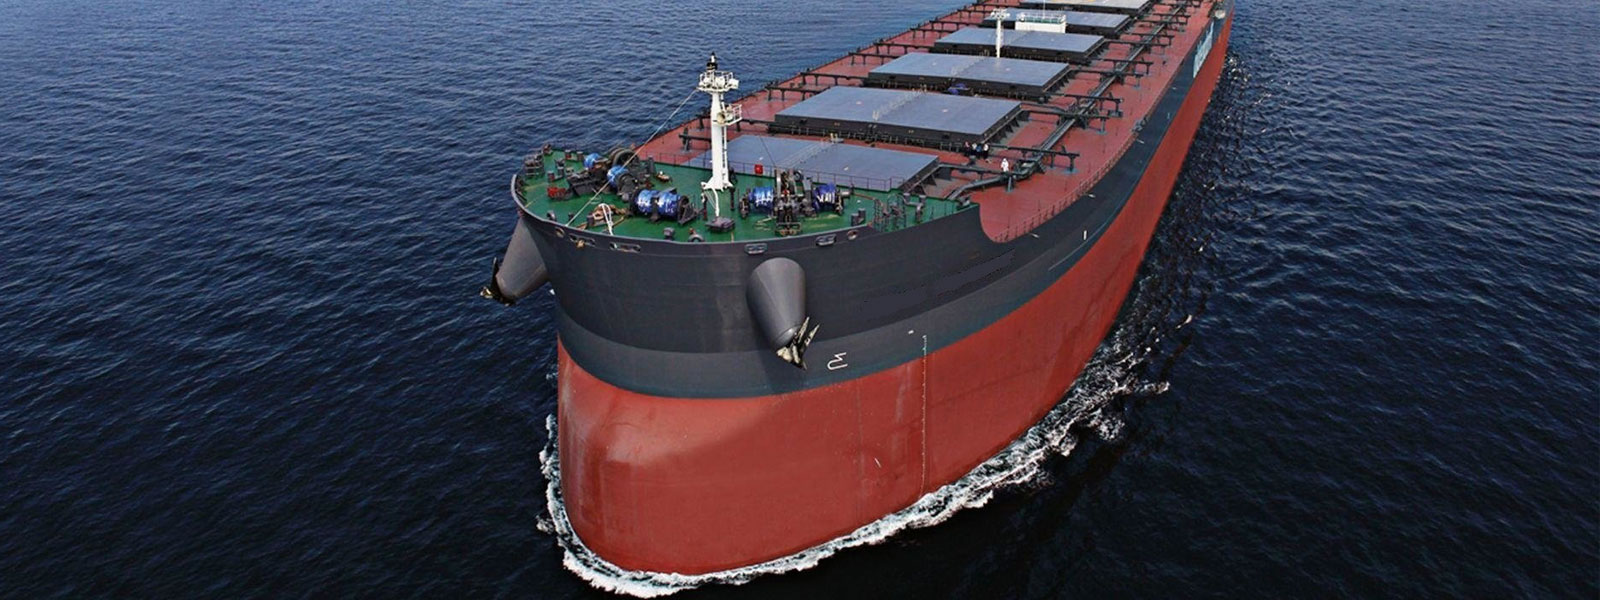 Supply of vessel requirements